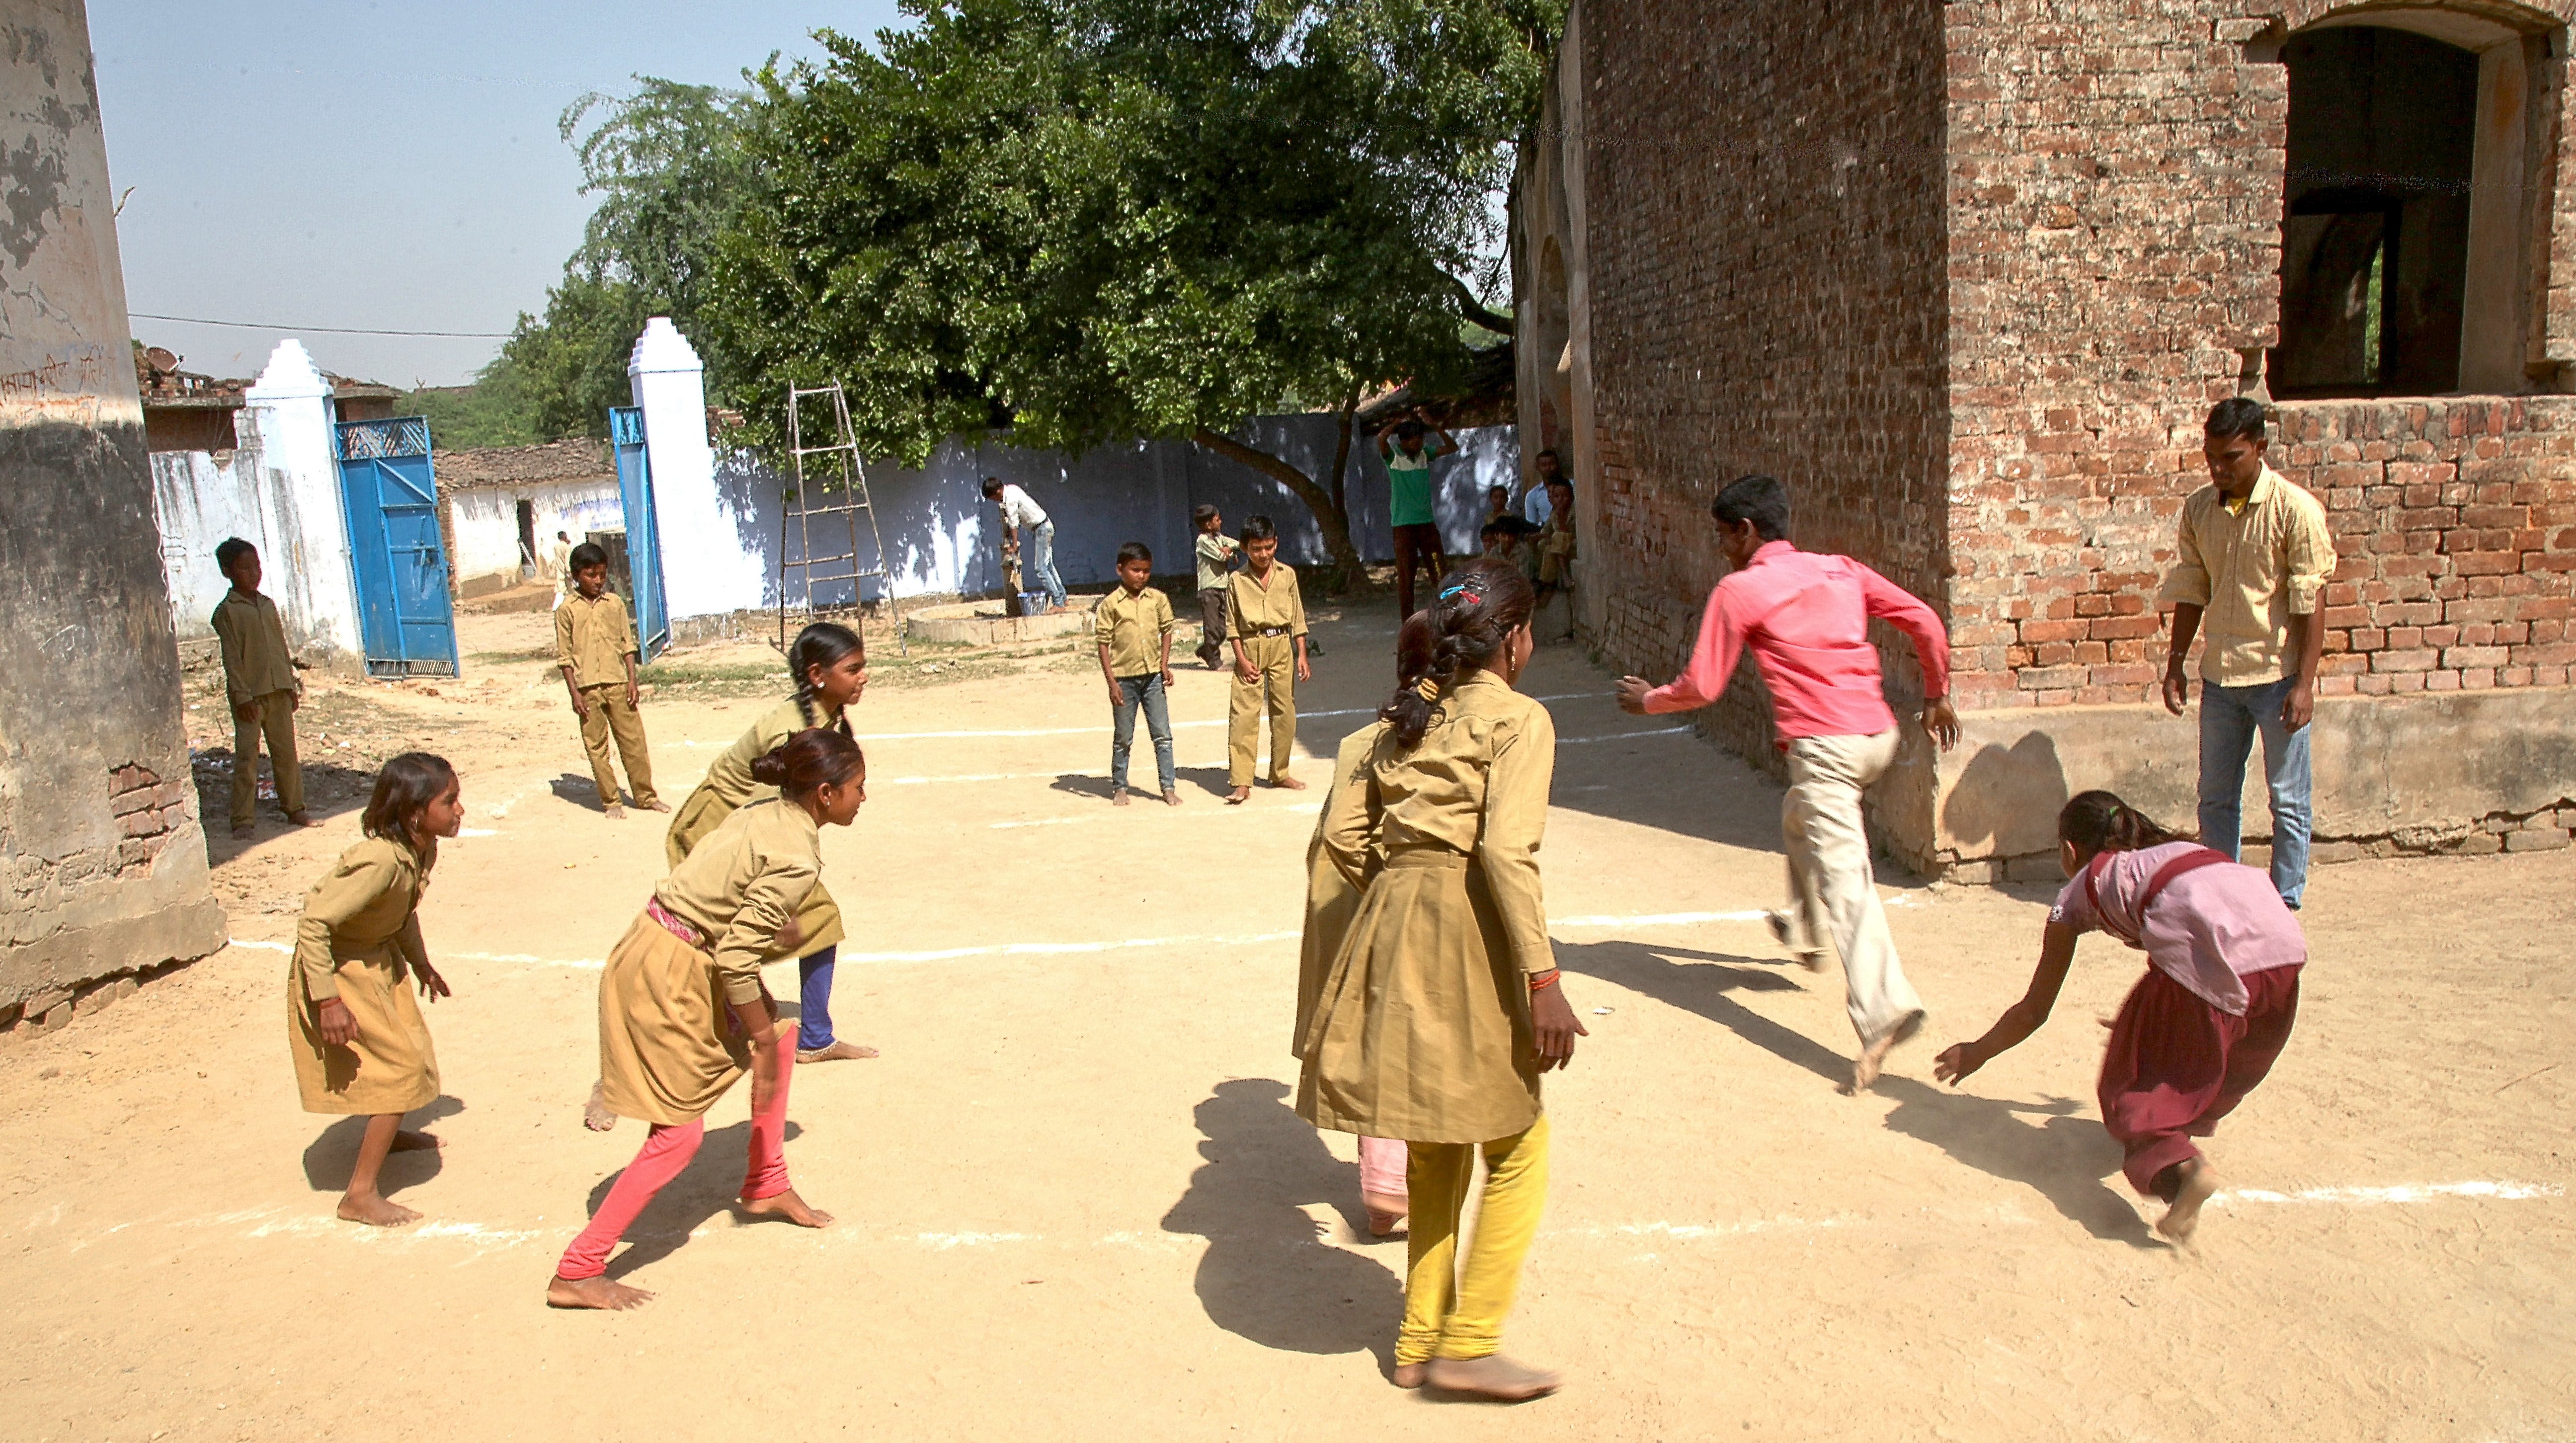 Both boys and girls joining sports activities in schools